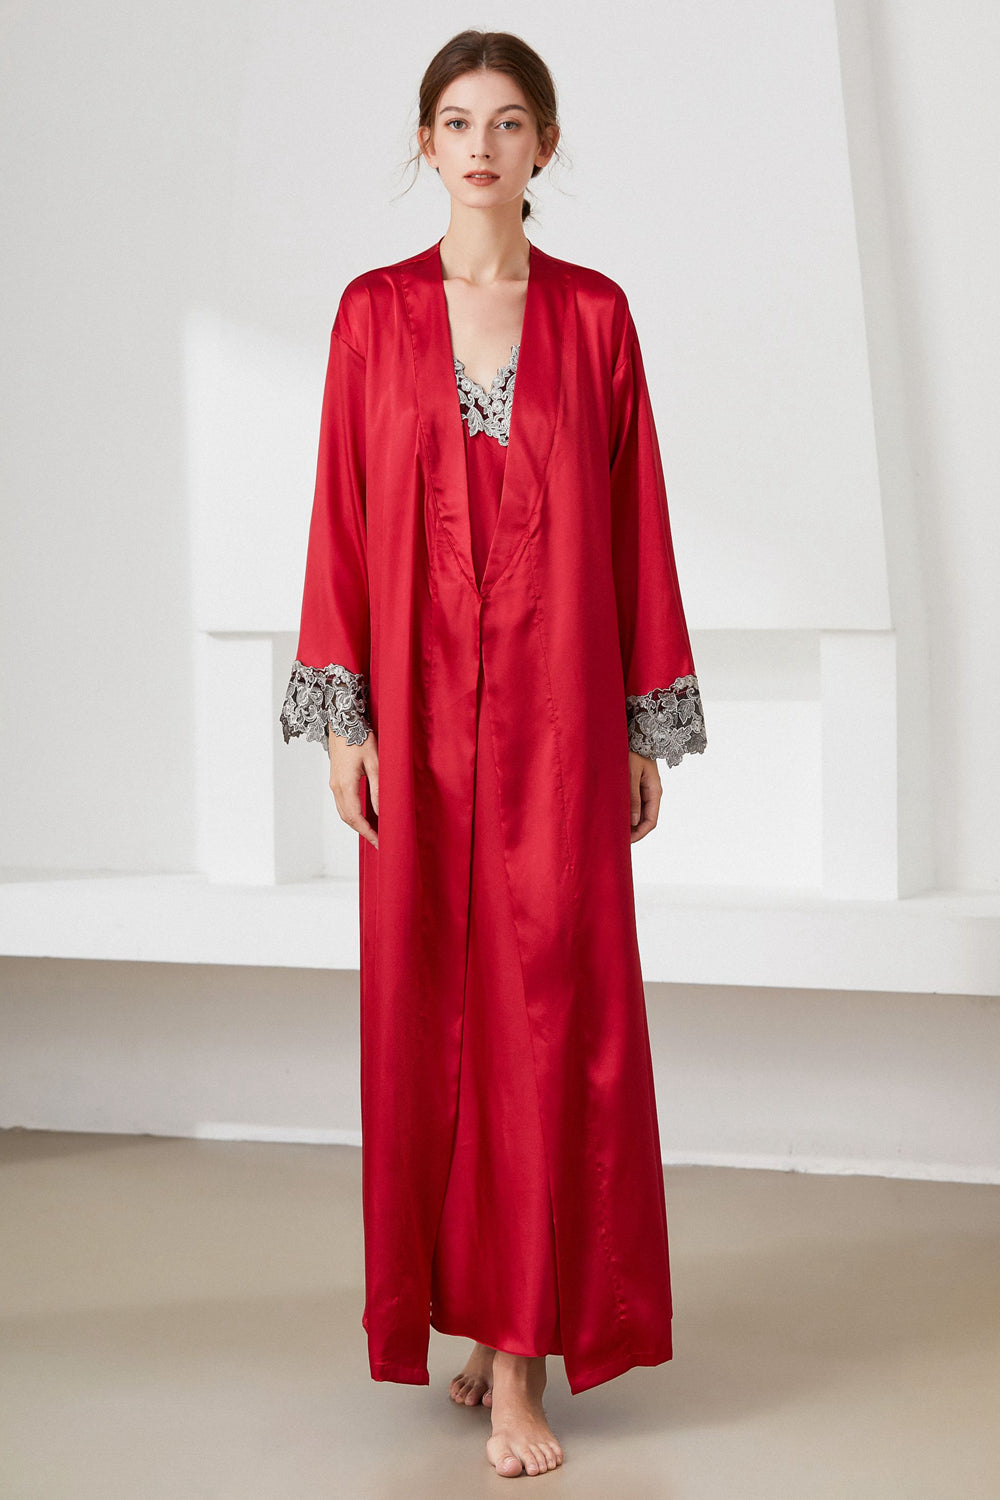 Contrast Lace Trim Satin Night Dress and Robe Set - Red / M Wynter 4 All Seasons